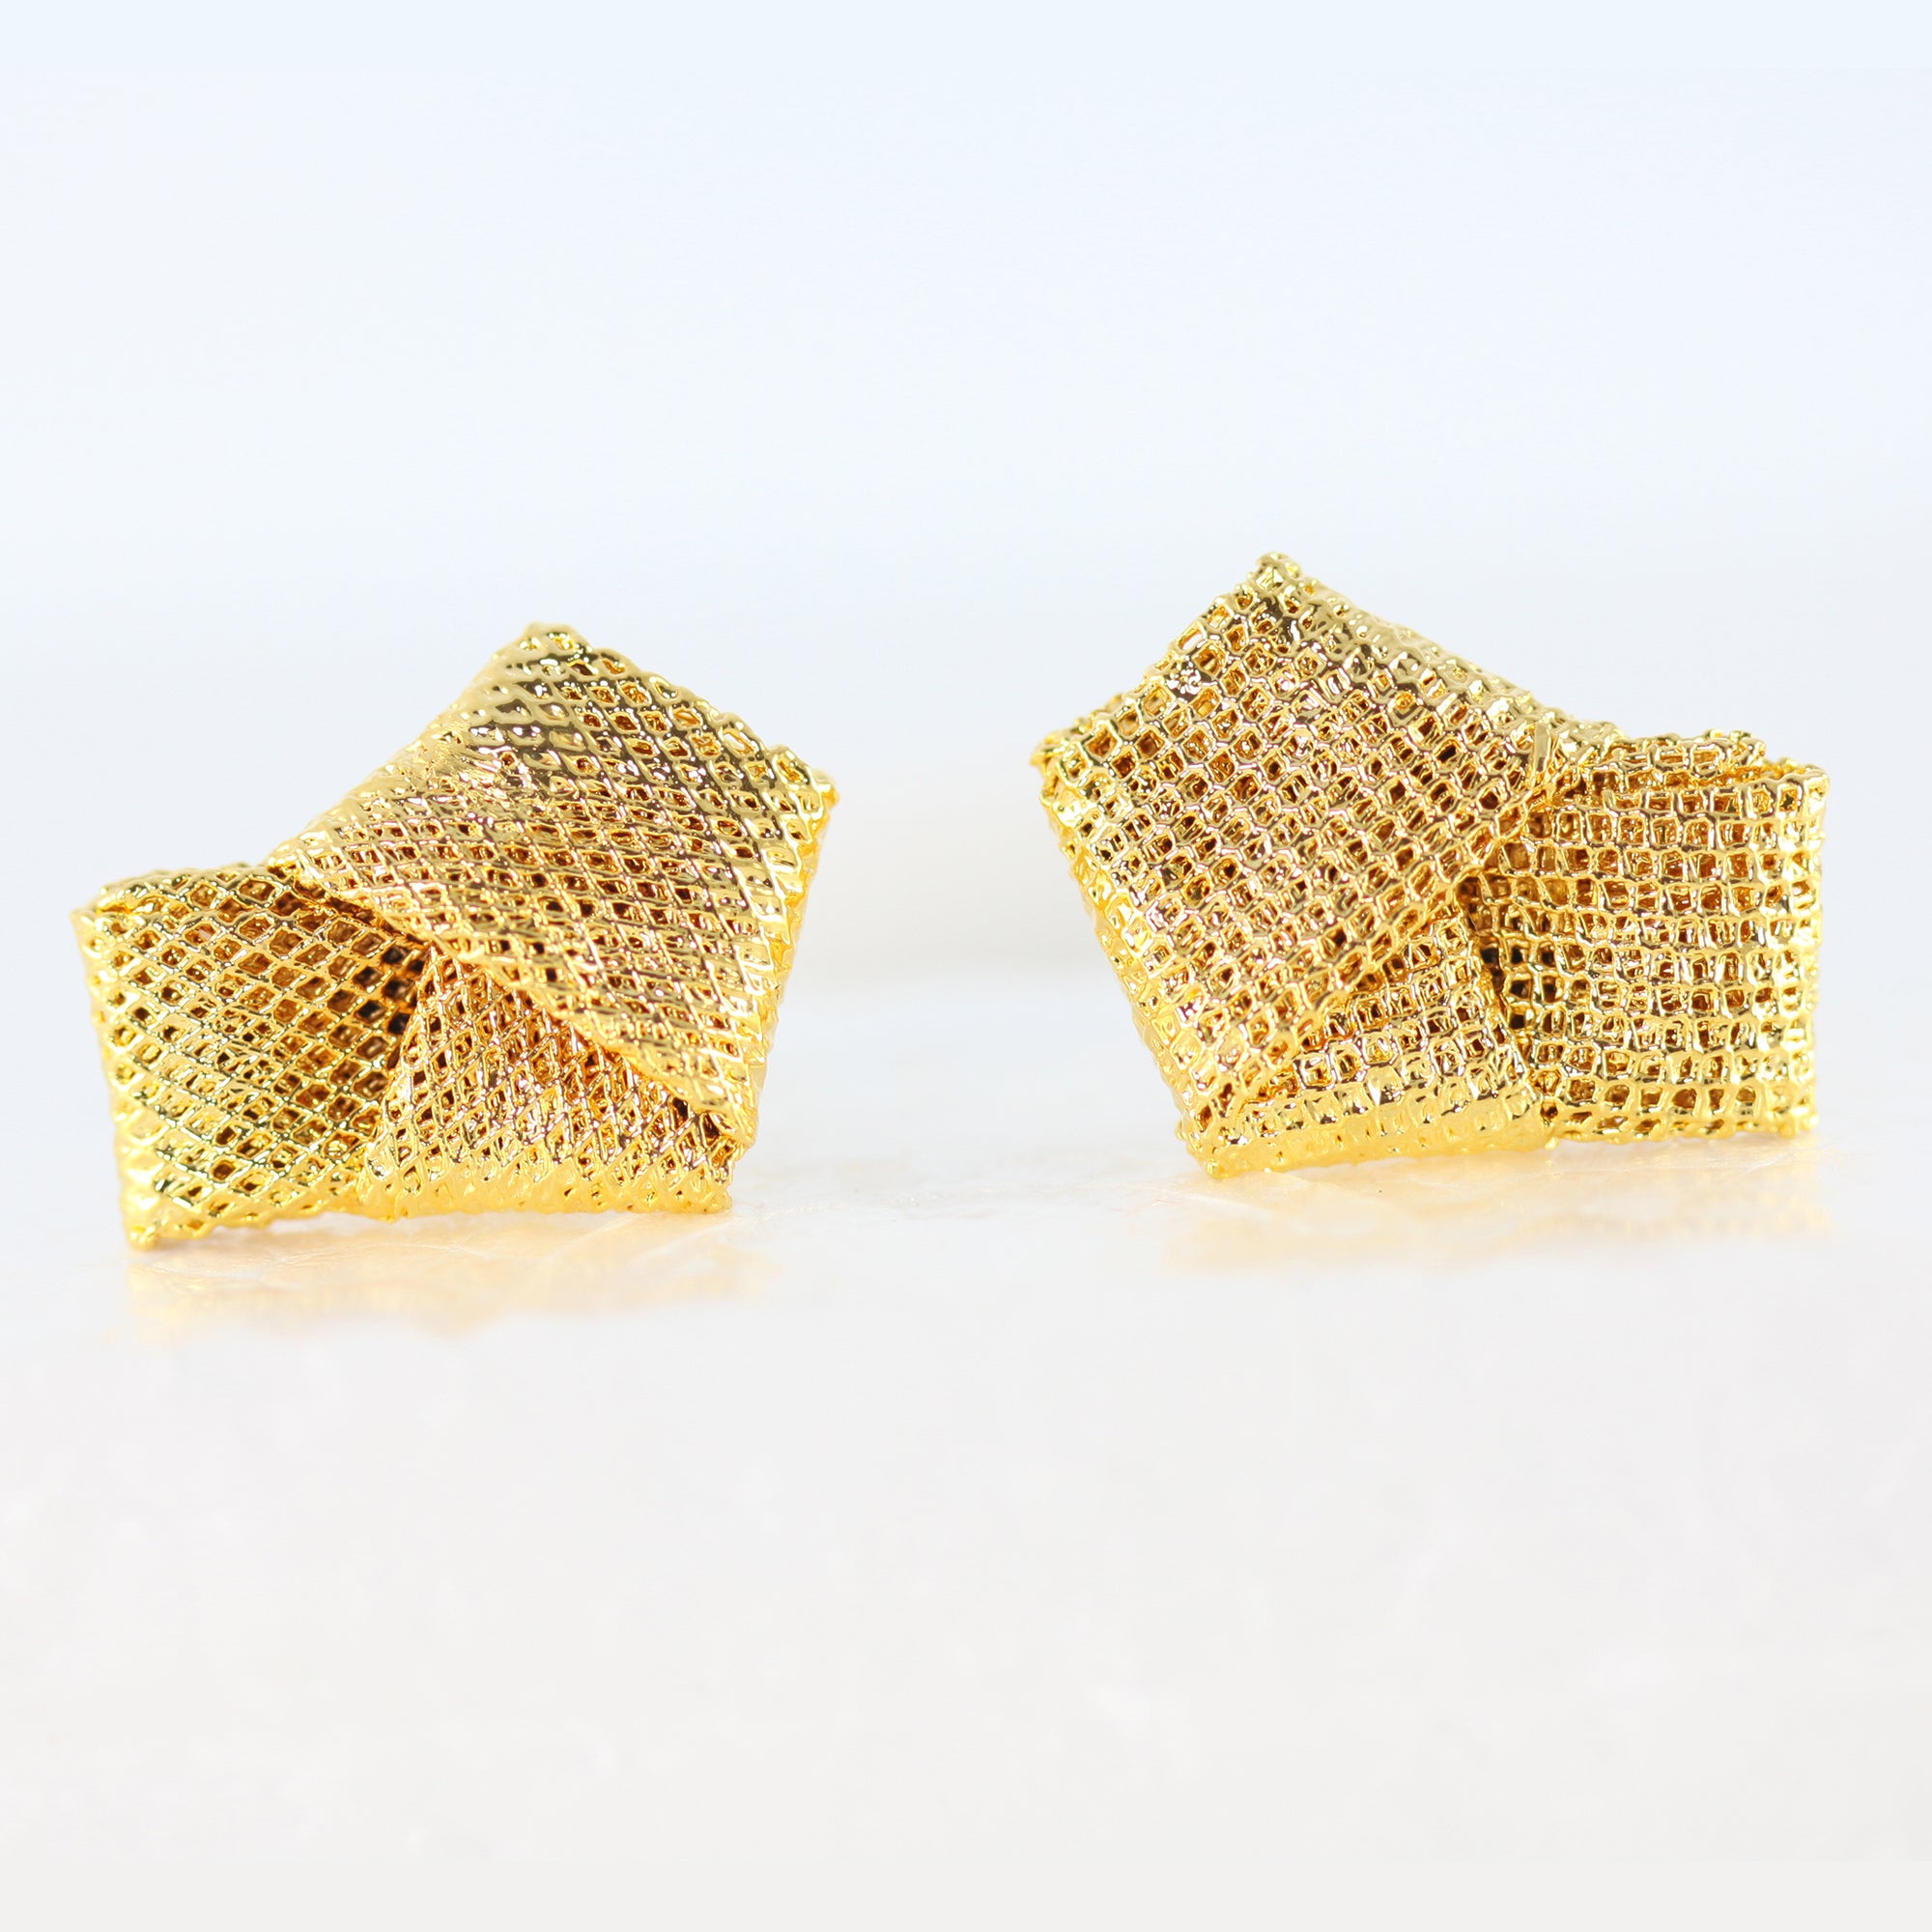 Cufflinks made from wedding dress tulle tied in a knot and dipped in 24k gold.